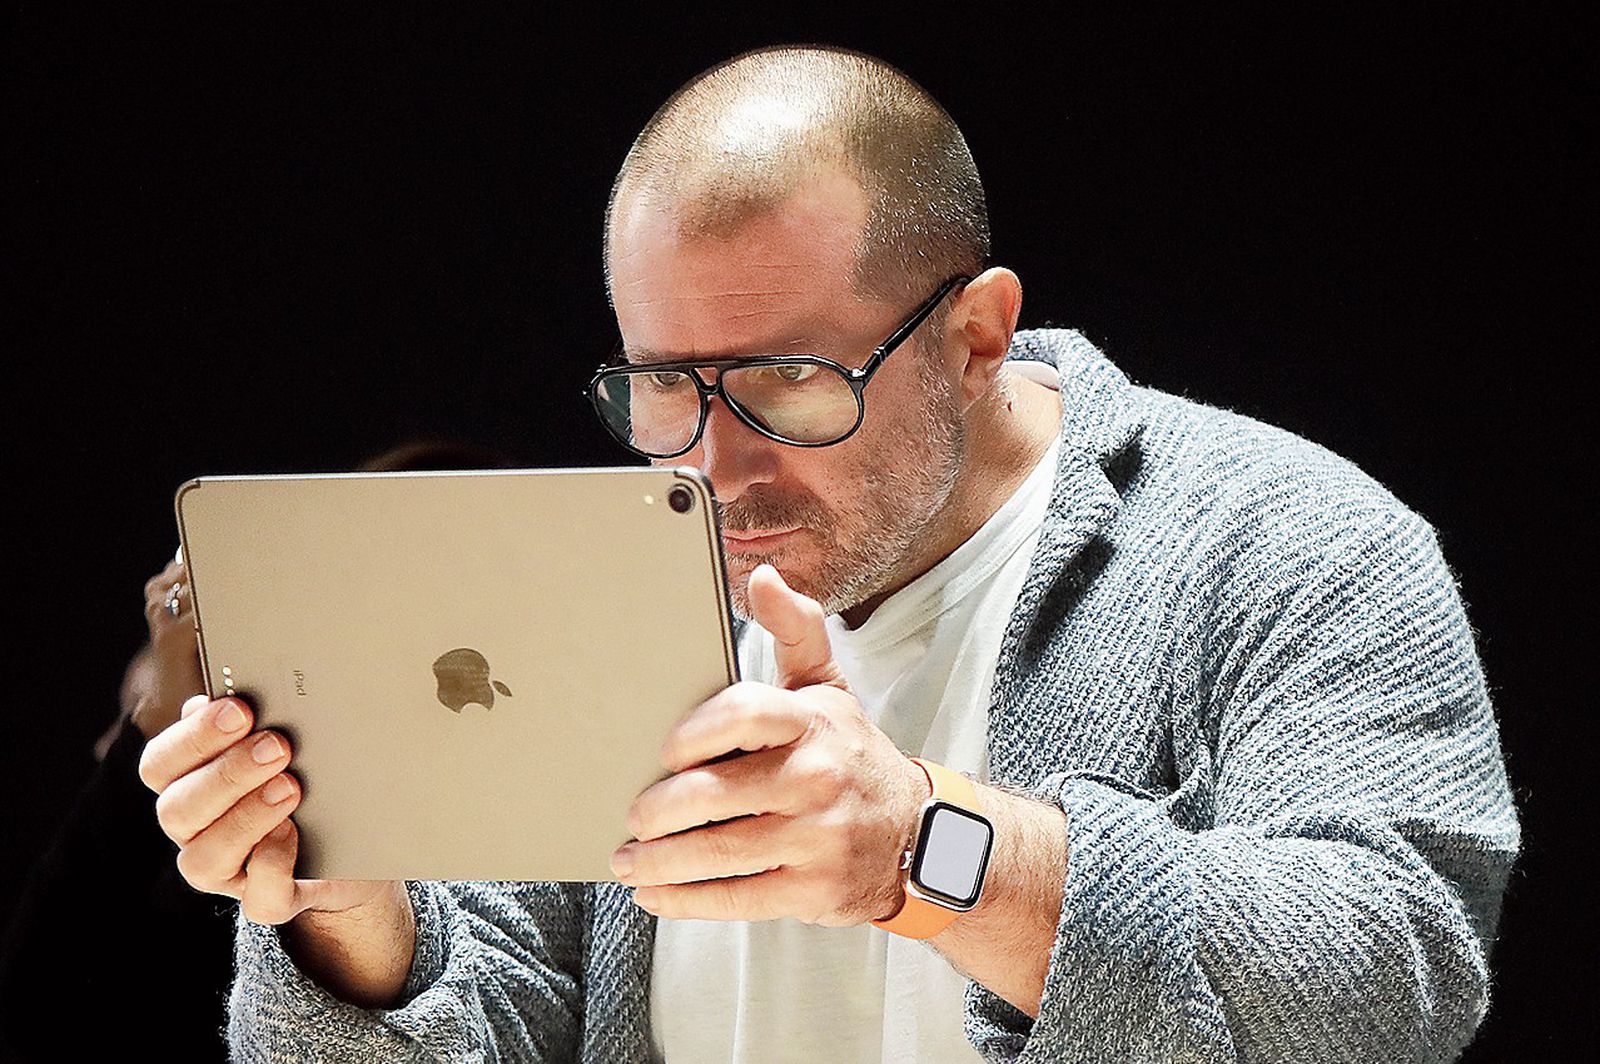 Former Apple Design Chief Jony Ive Shares His 12 Favorite Tools of the Trade